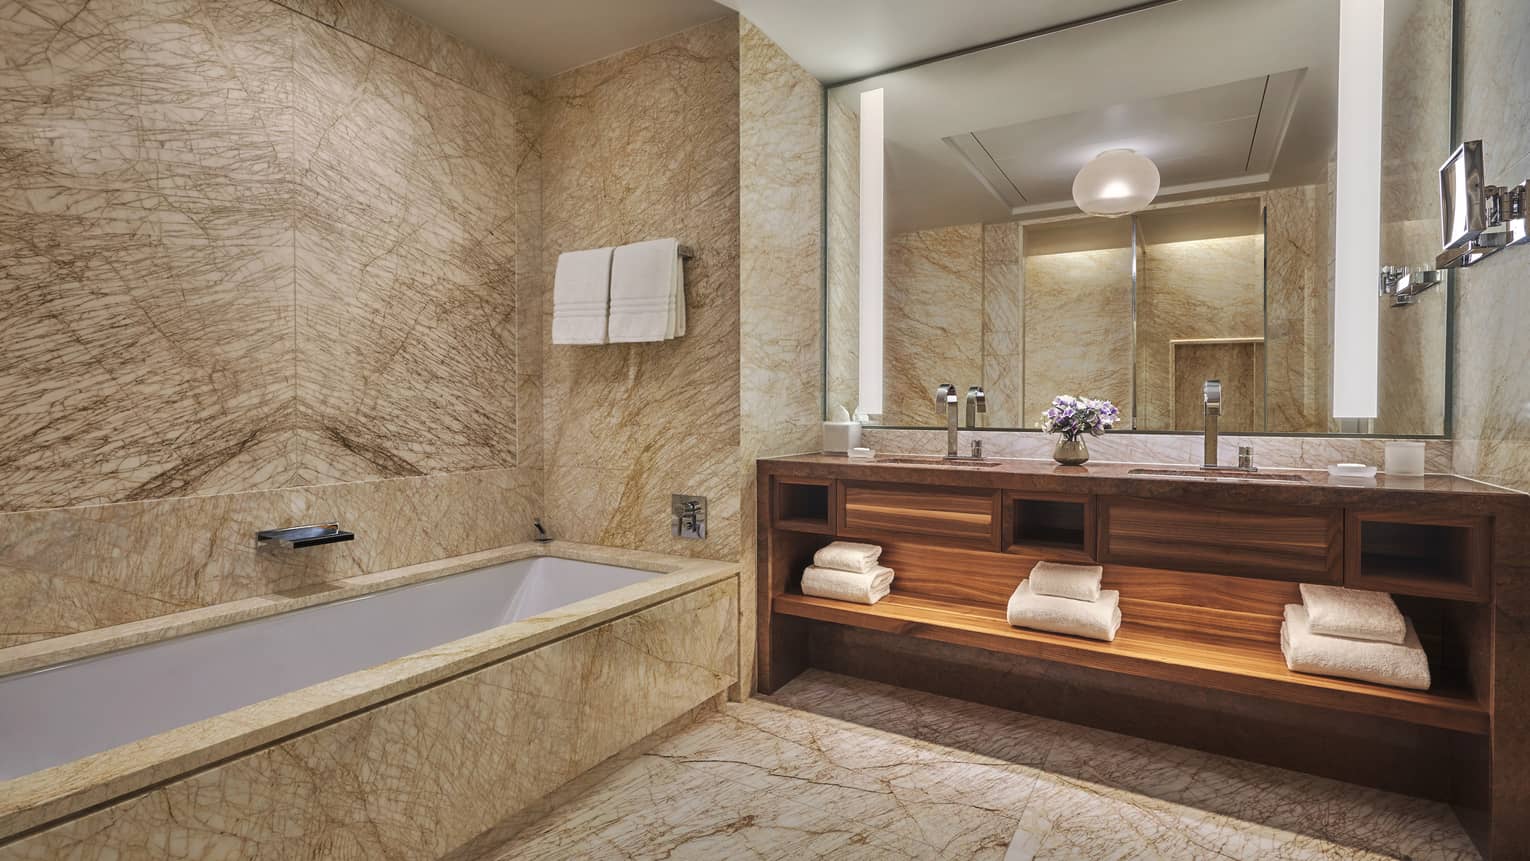 Guest bathroom with rectangular marble tub and floors, double wooden vanity, mirror